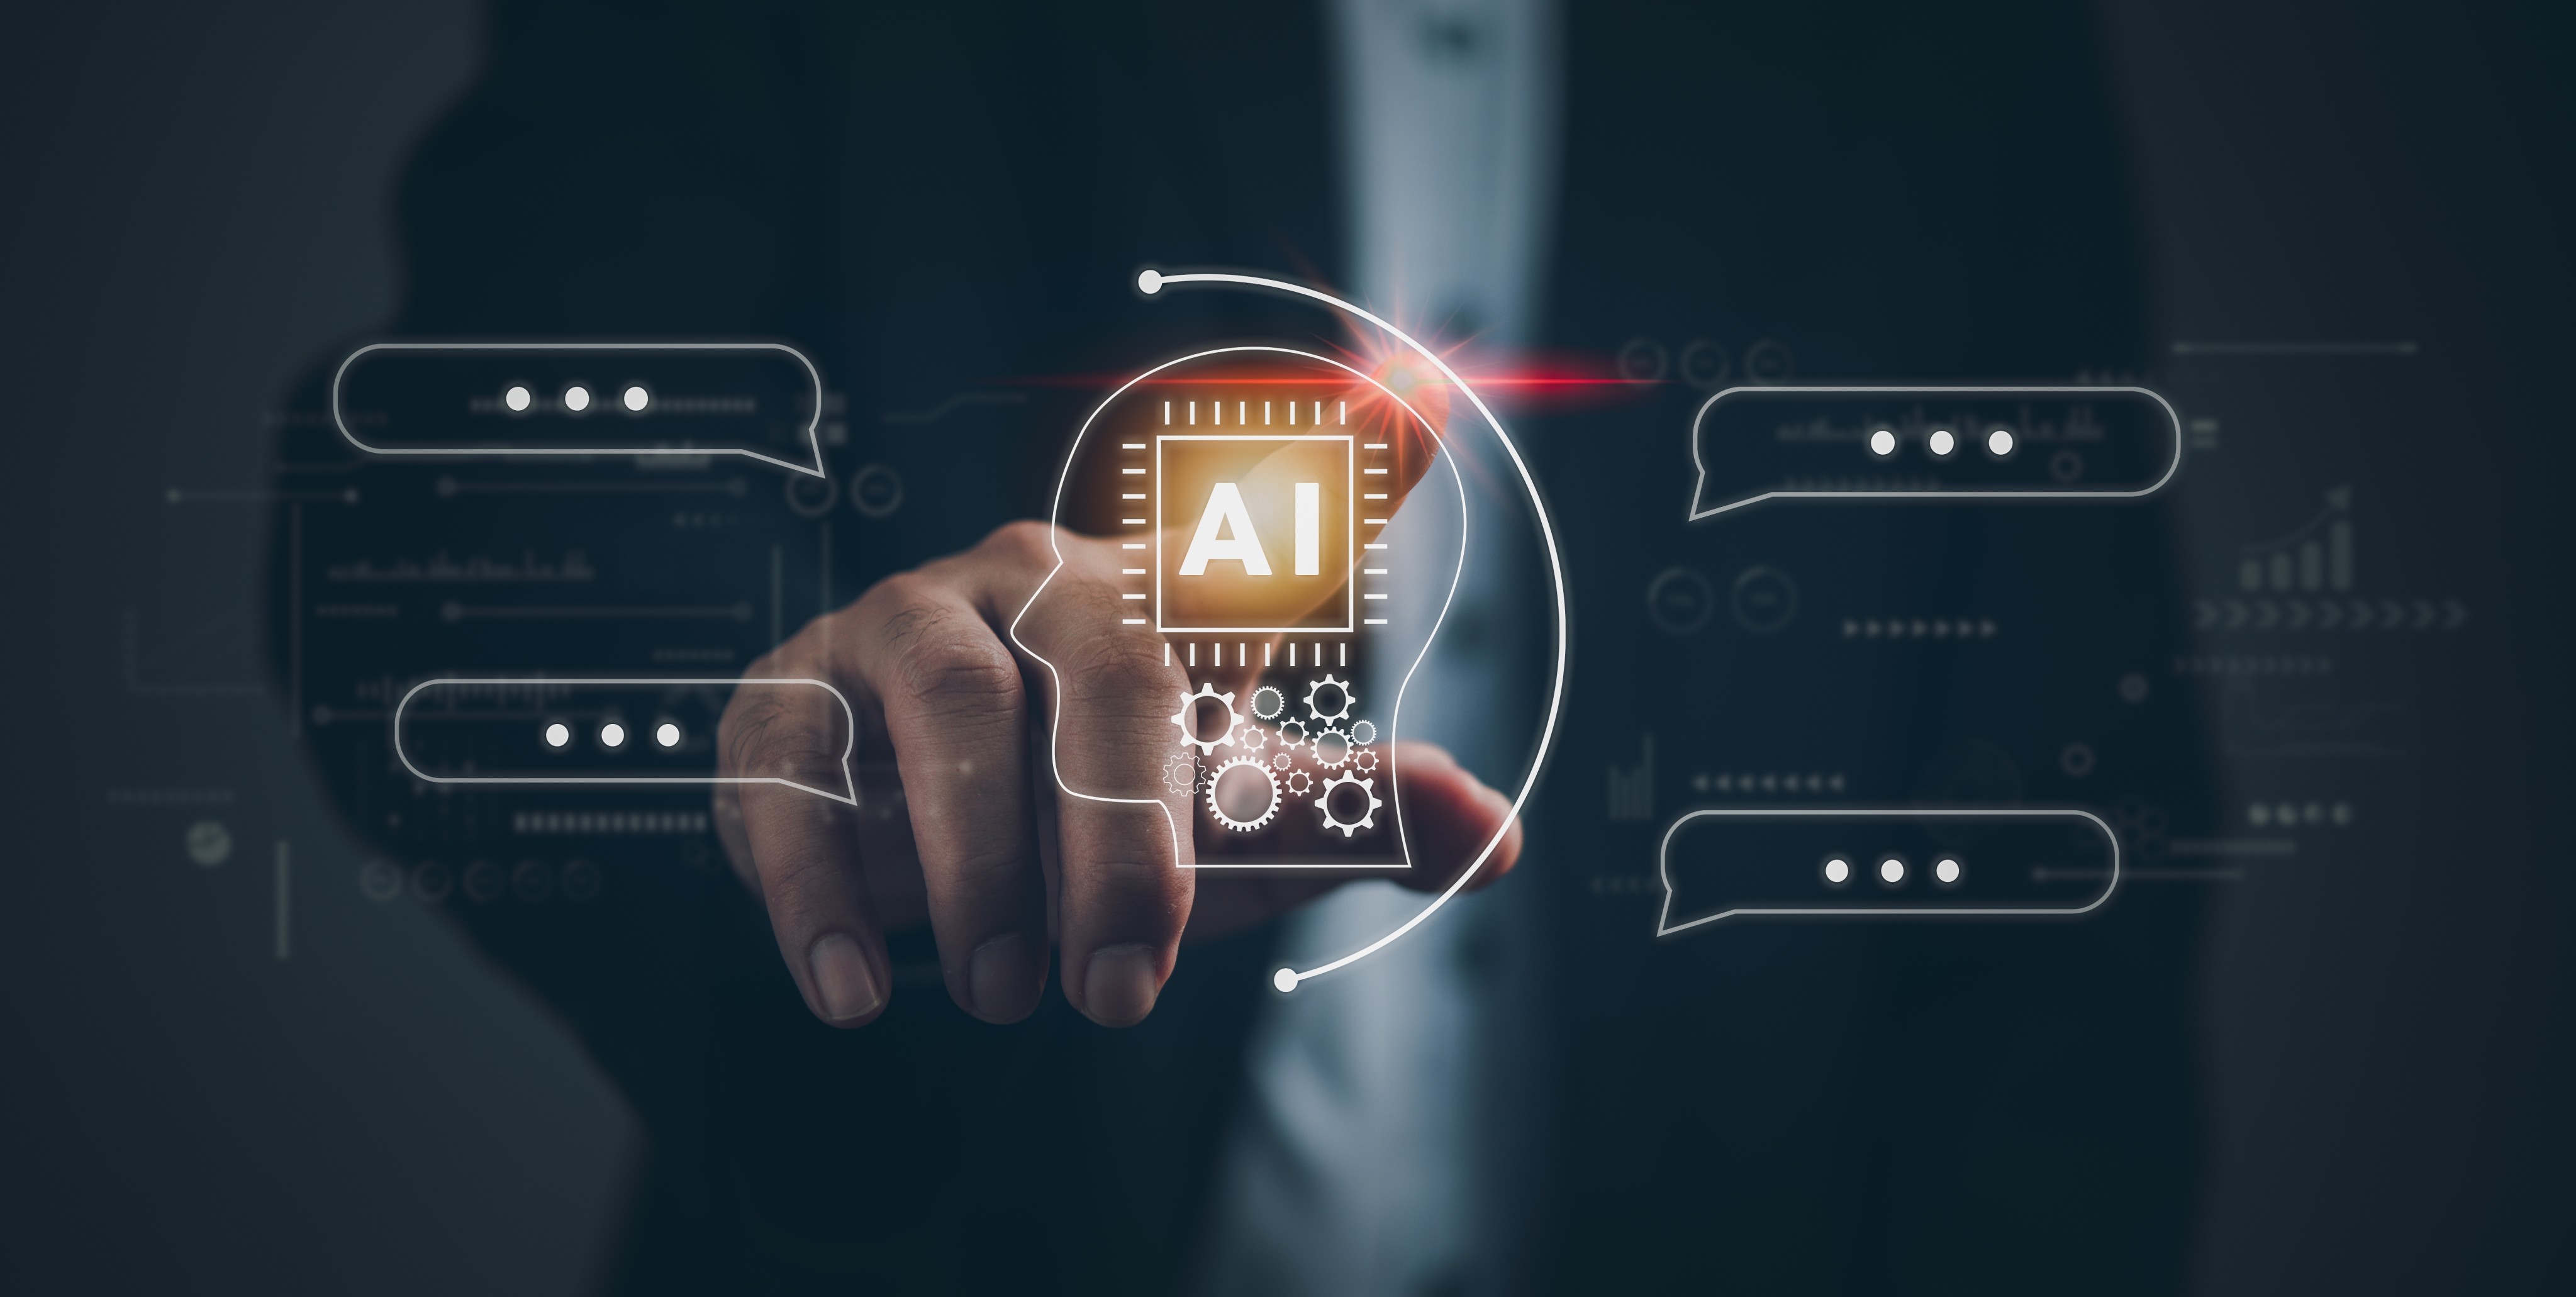 Large language products will “likely be the biggest leap in artificial intelligence technology”, according to one NPC deputy. Photo:  Shutterstock